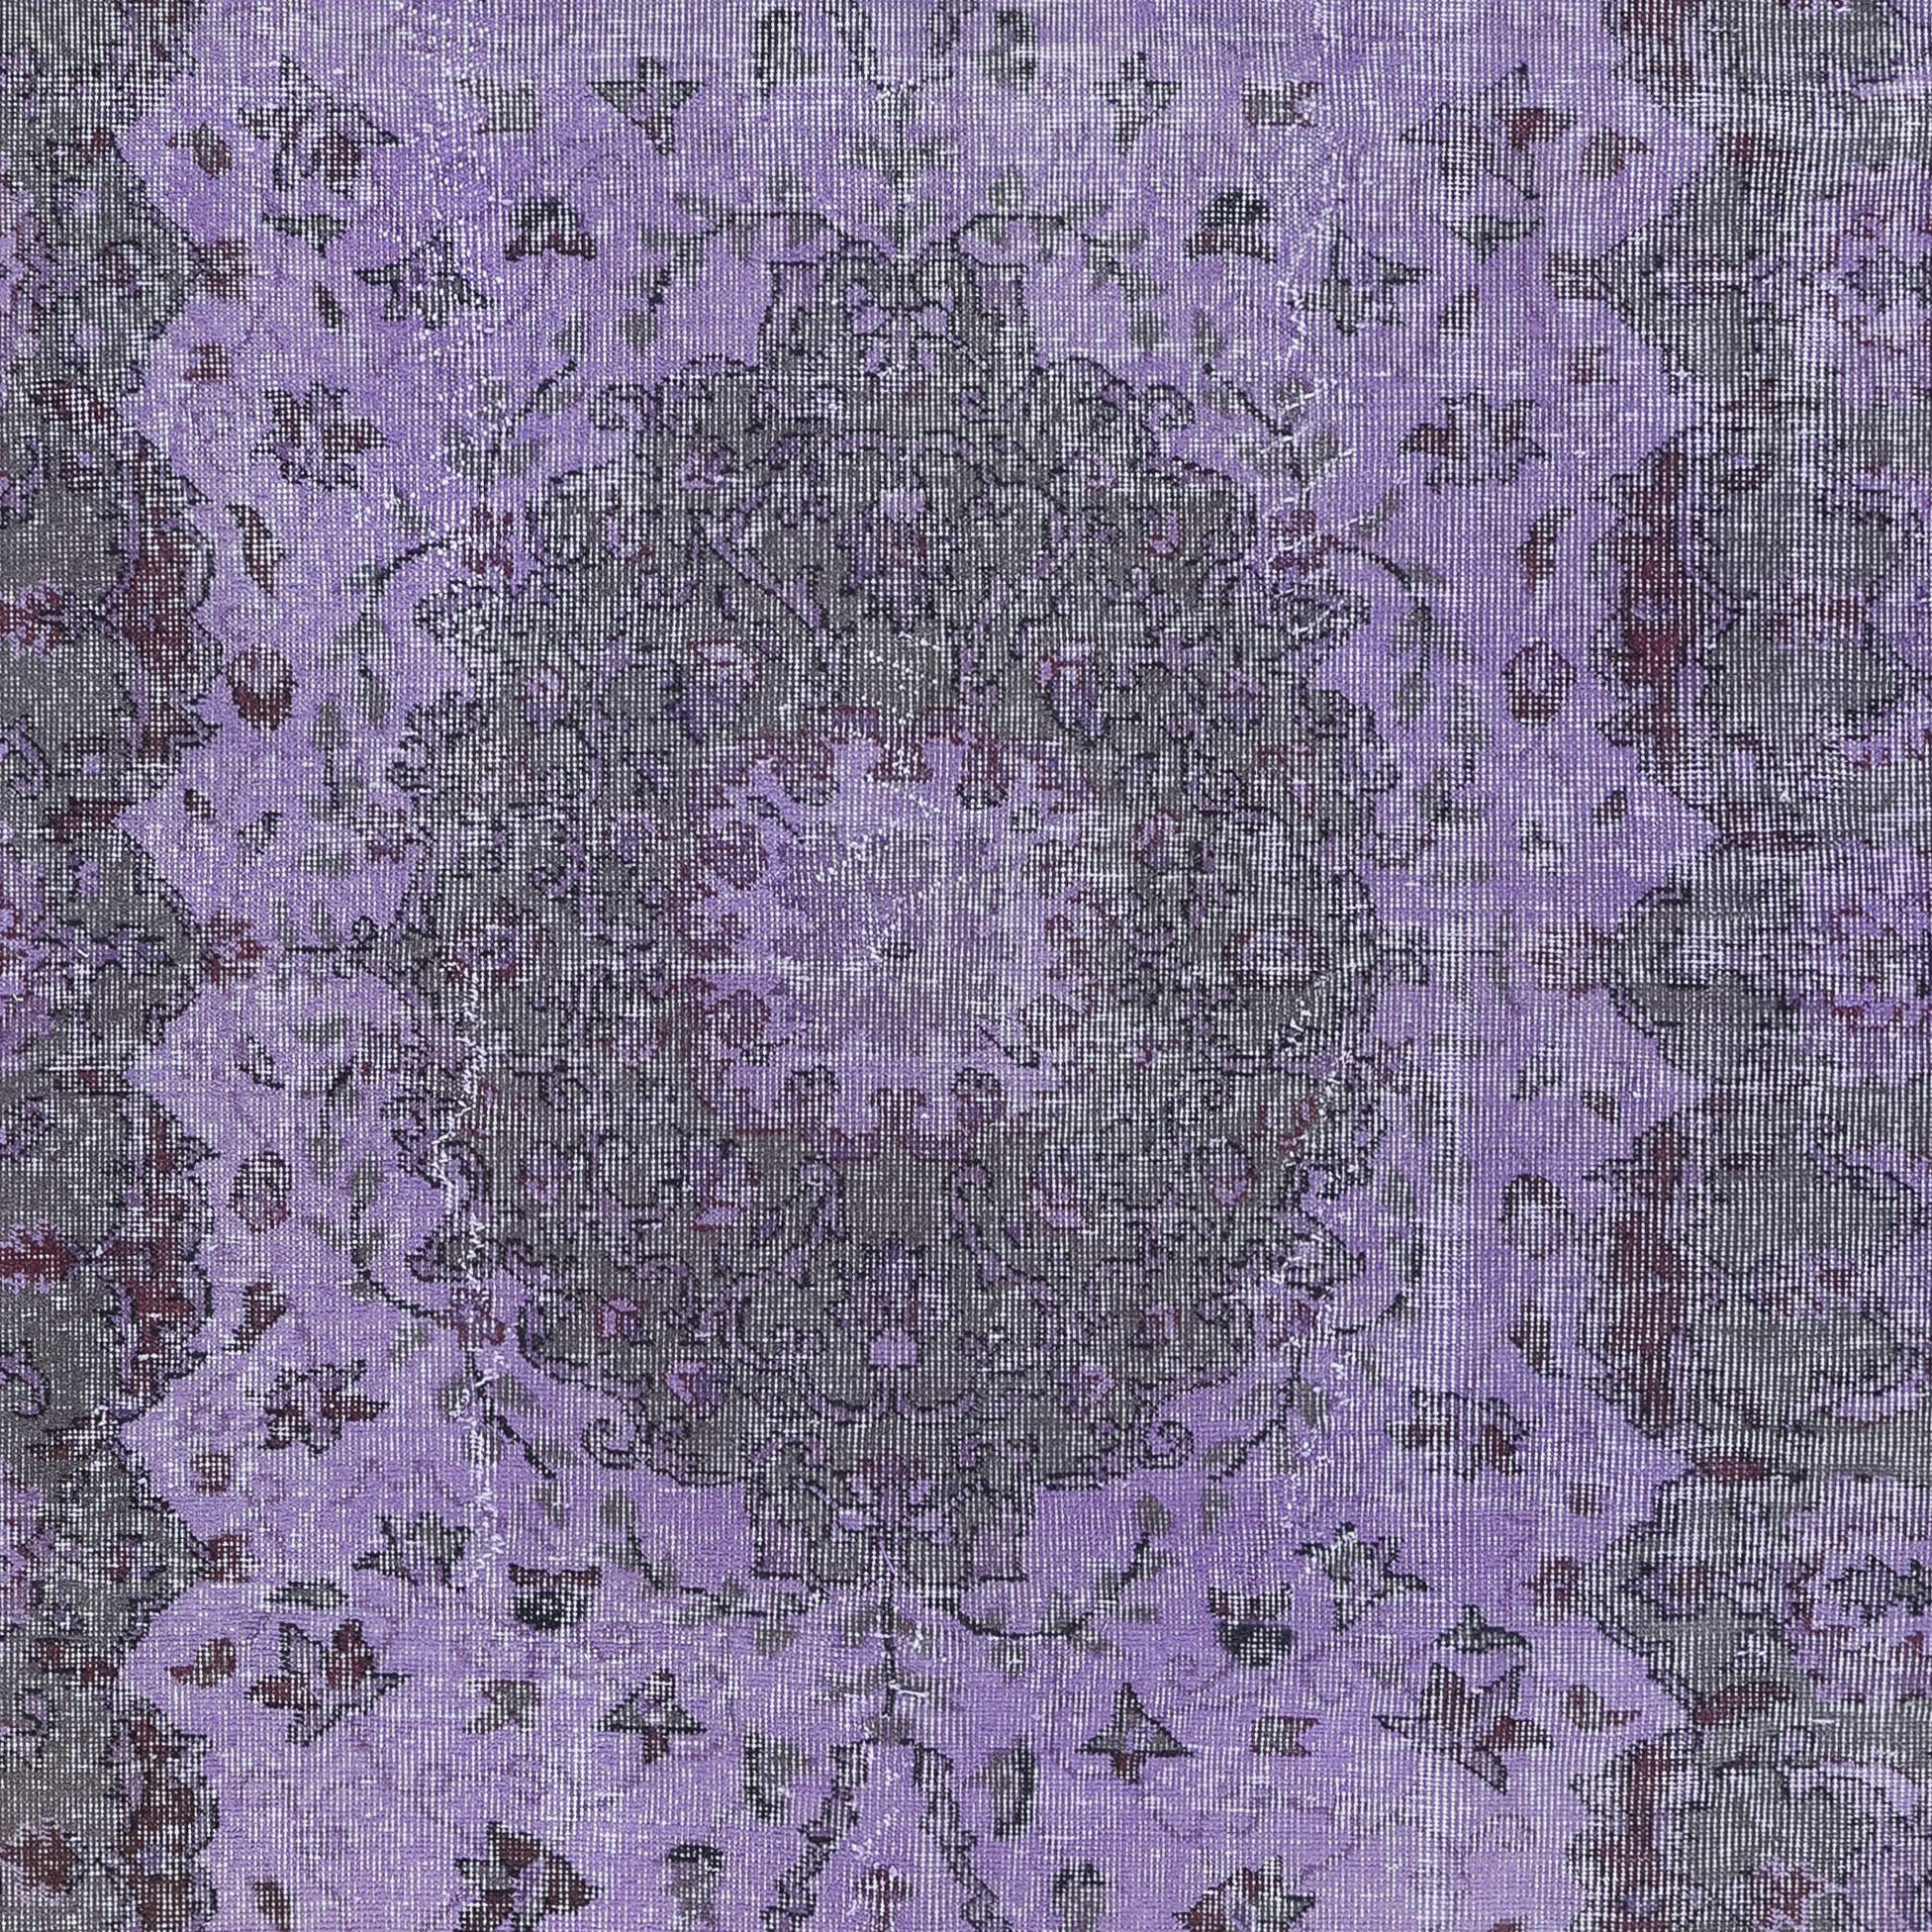 Turkish 5.3x8.8 Ft Modern Purple Area Rug, Handknotted and Handwoven in Turkey